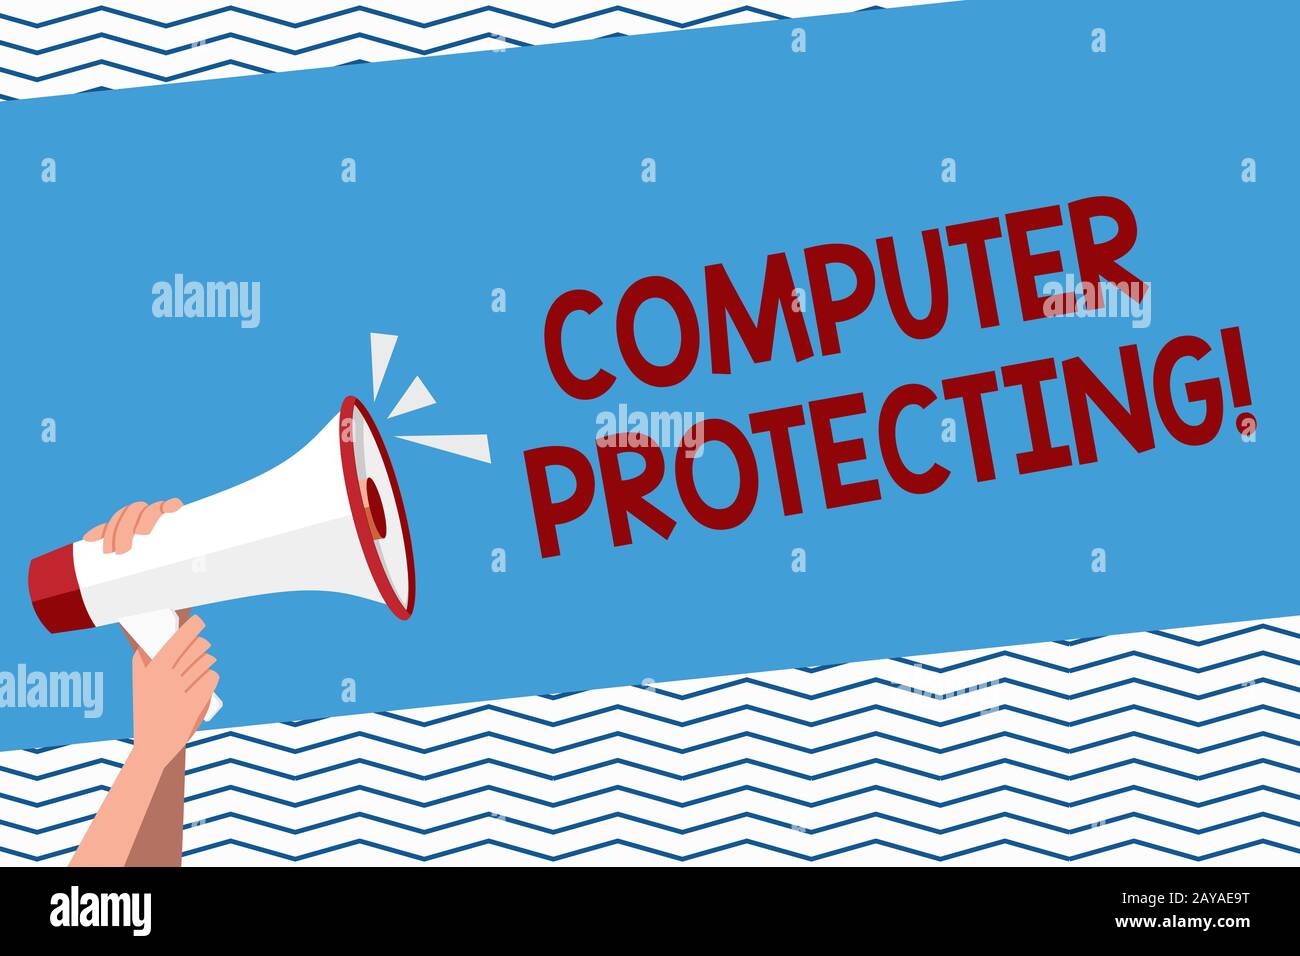 Conceptual hand writing showing Computer Protecting. Business photo text protecting computer against unauthorized intrusions Hum Stock Photo